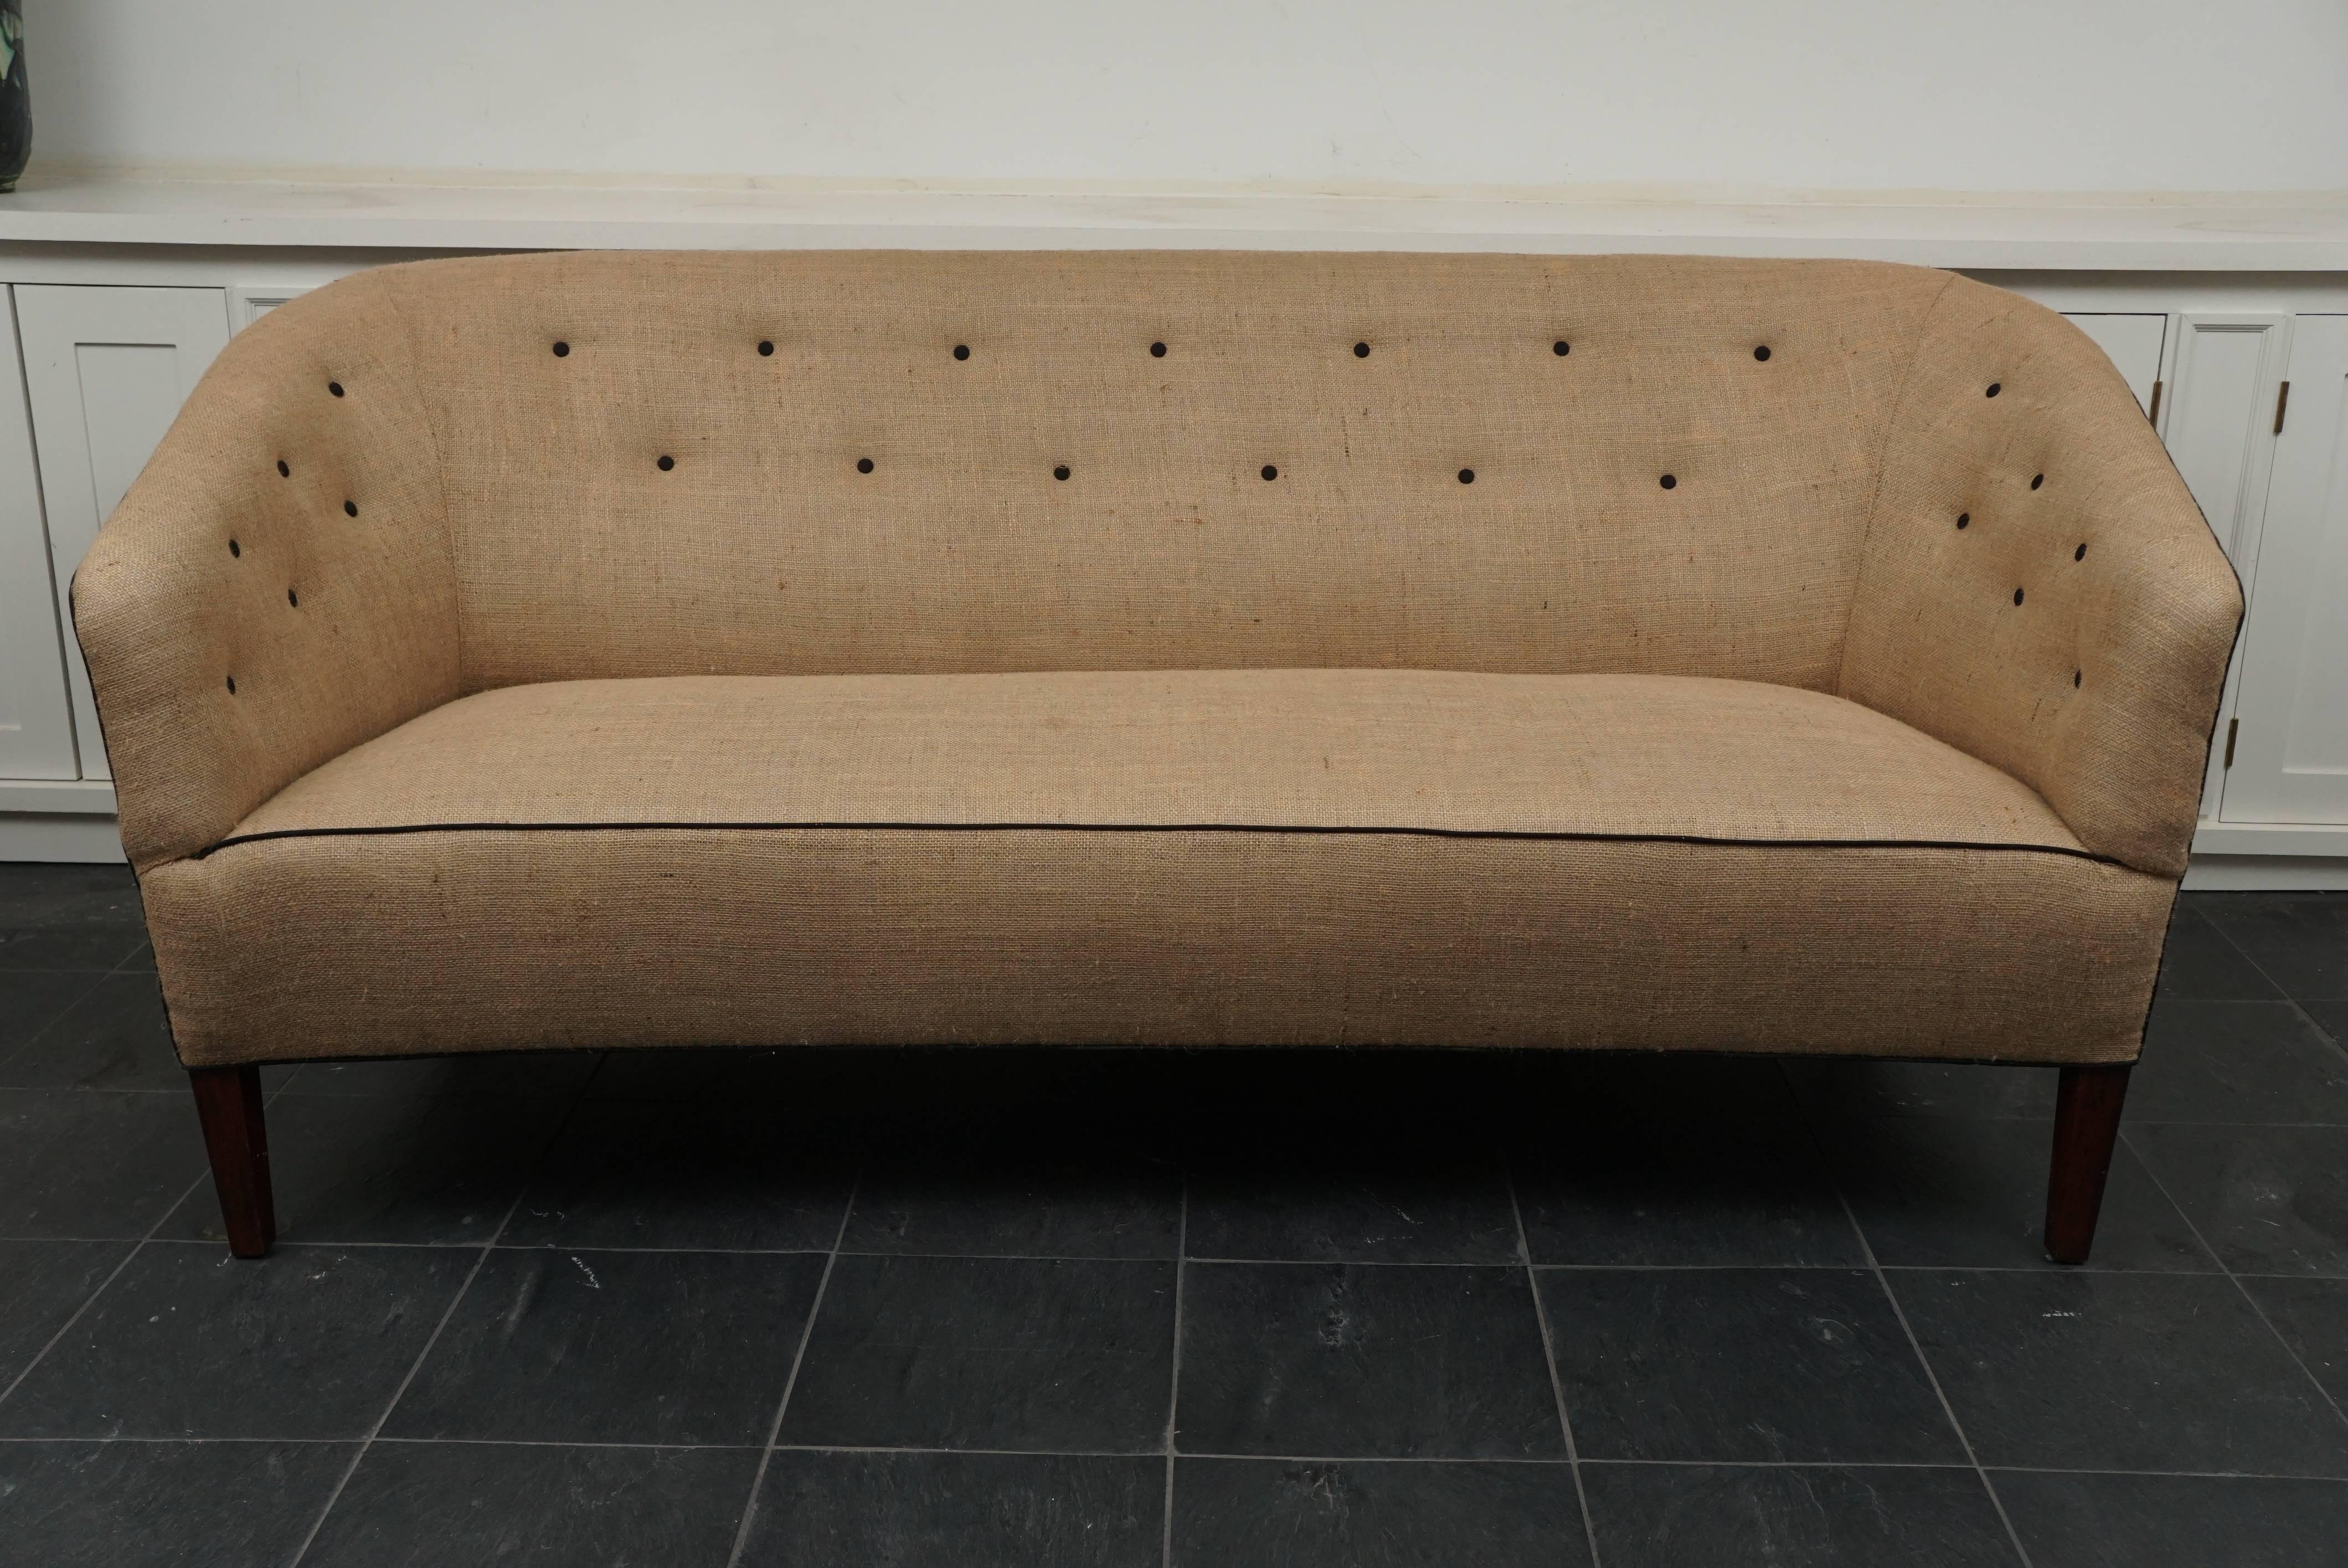 Danish modern three-seat sofa by well-known designer, Louis Pontoppidan,
with buttoned back newly recovered in beige burlap with black trim.